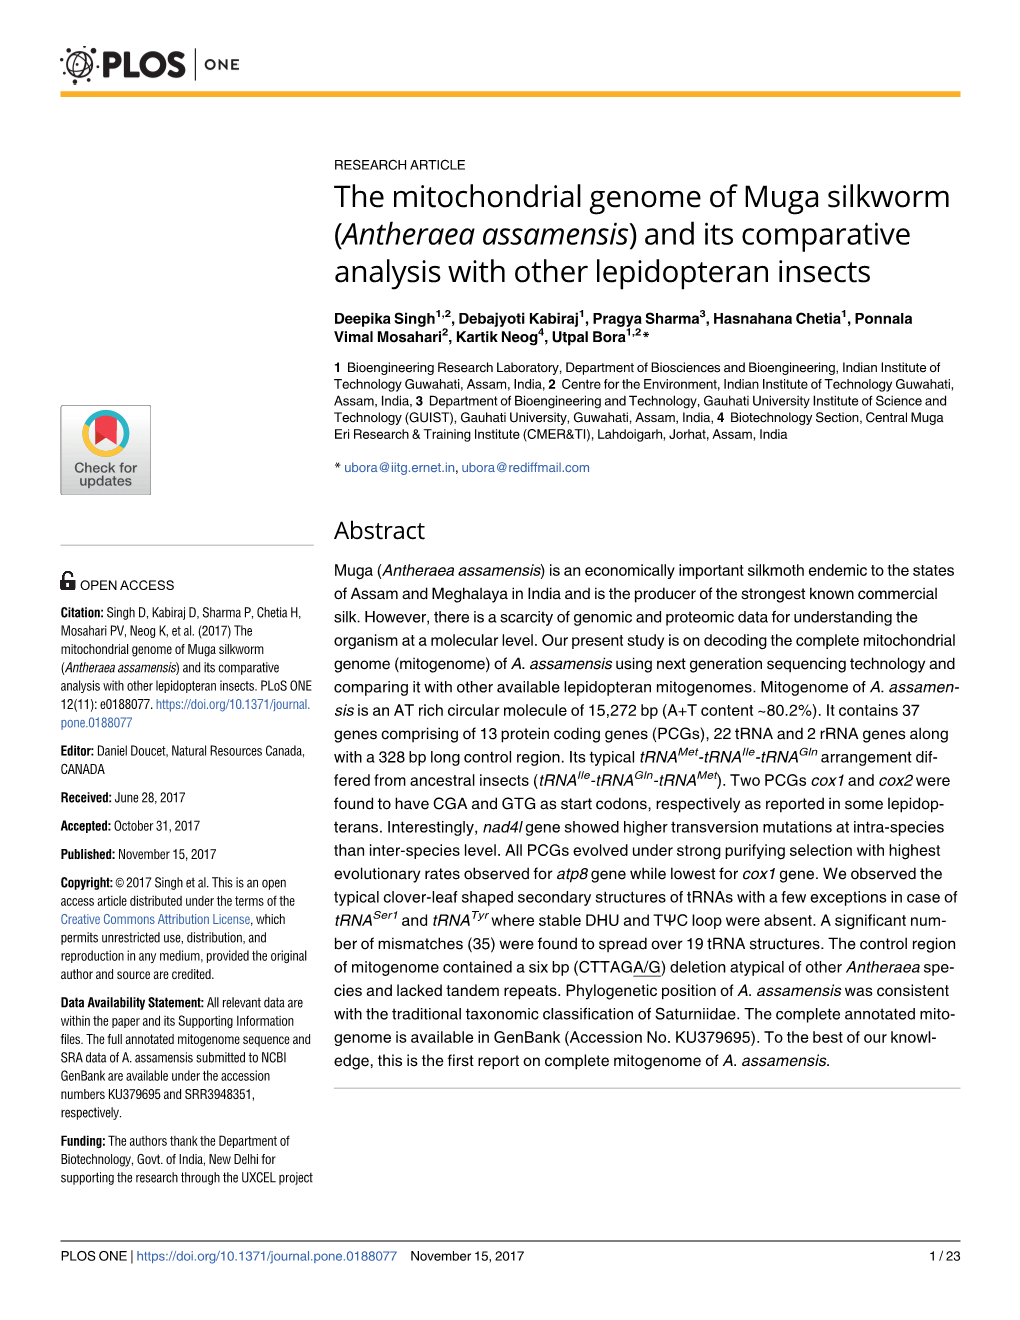 The Mitochondrial Genome of Muga Silkworm (Antheraea Assamensis) and Its Comparative Analysis with Other Lepidopteran Insects